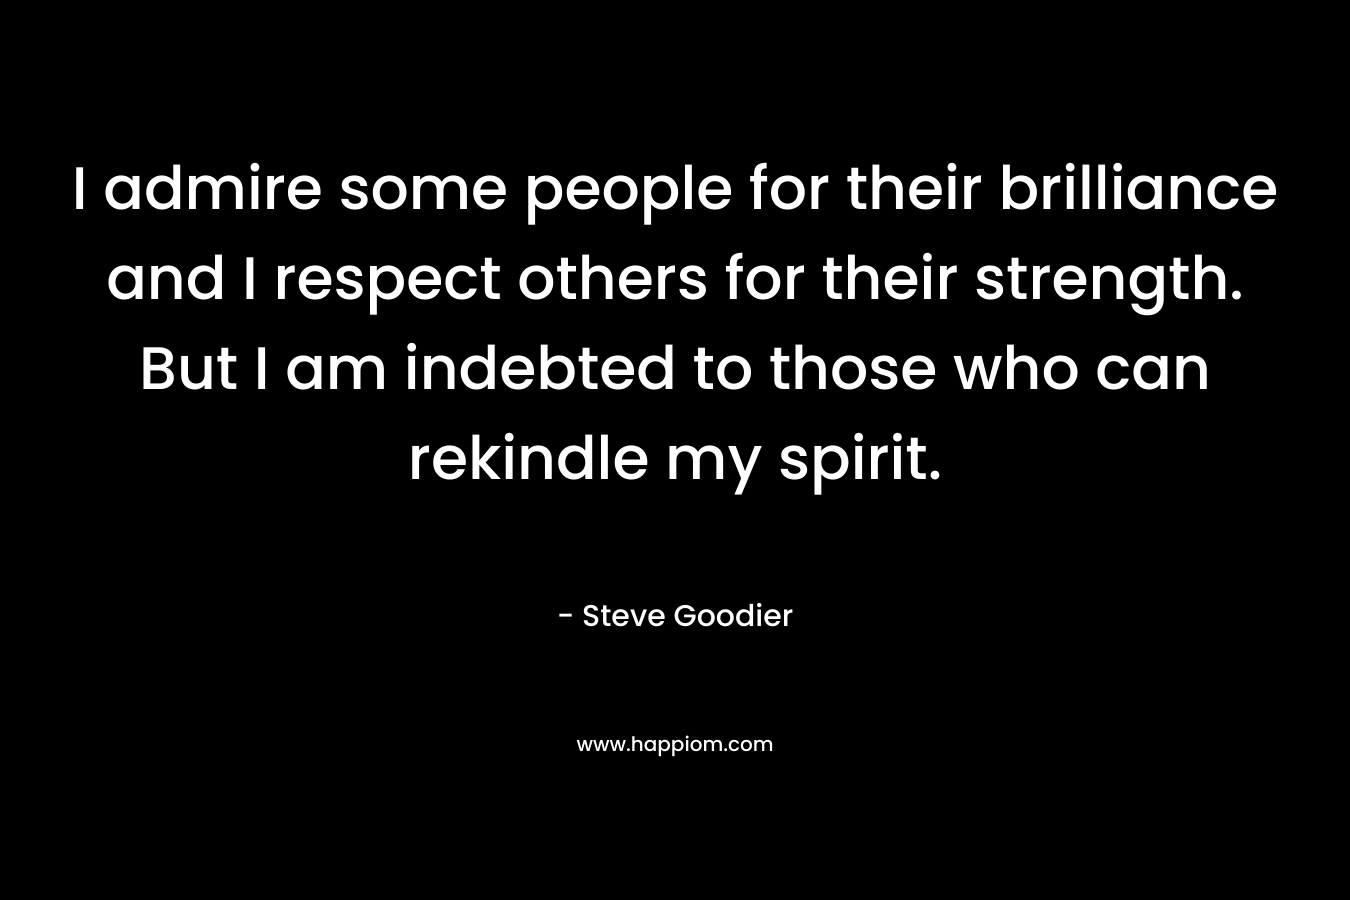 I admire some people for their brilliance and I respect others for their strength. But I am indebted to those who can rekindle my spirit.